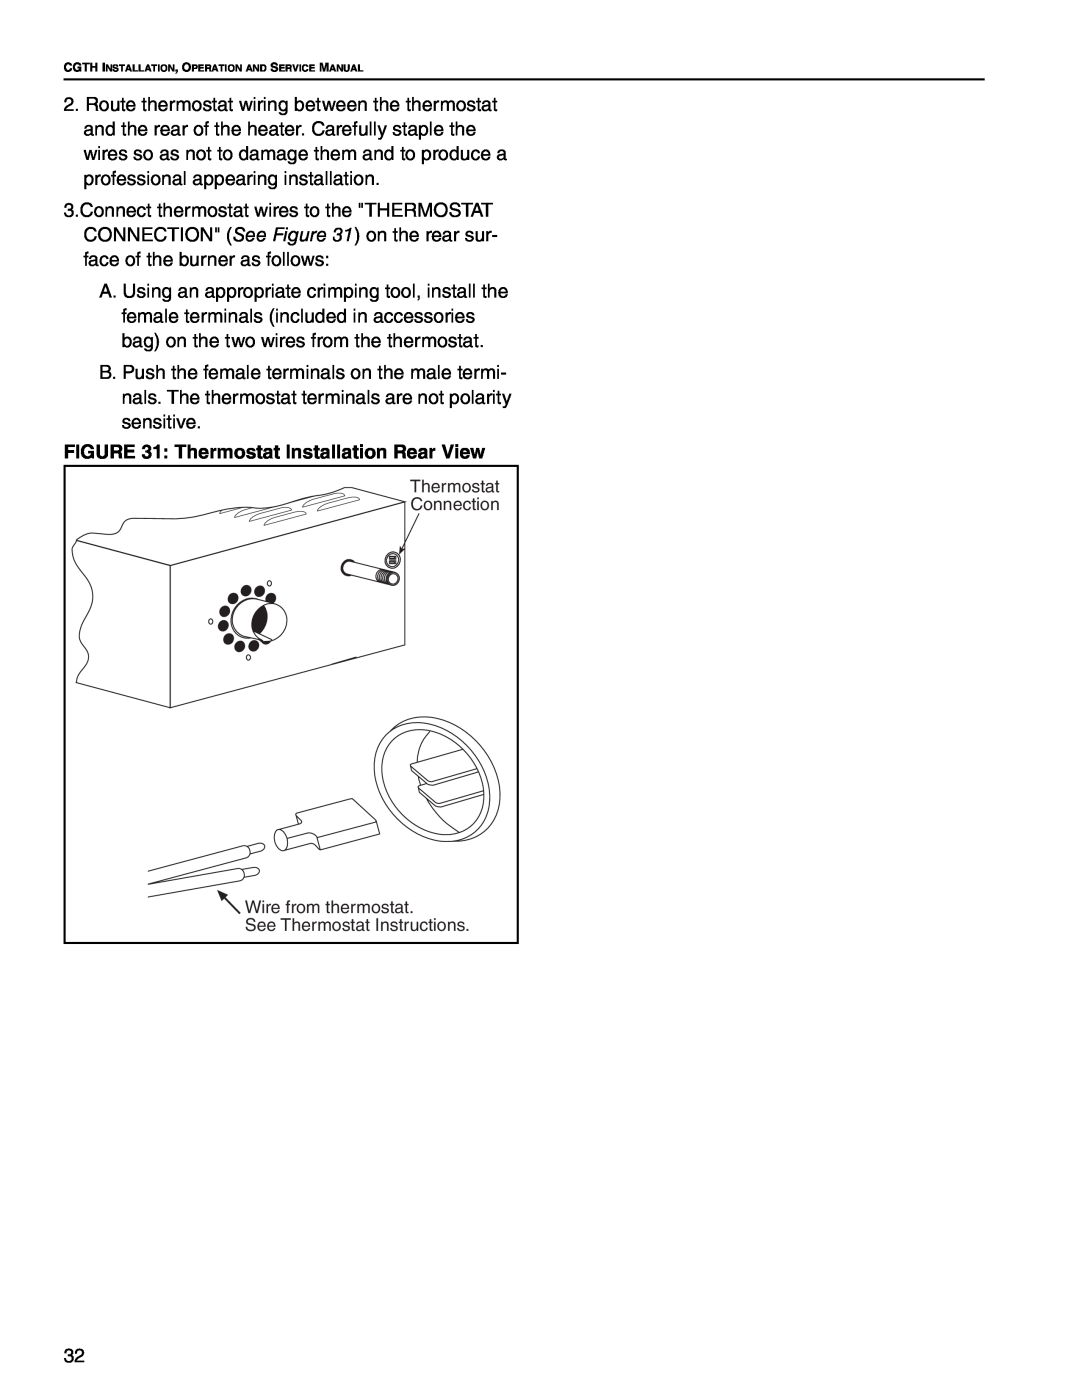 Roberts Gorden CGTH-40, CGTH-30, CGTH-50 service manual Thermostat Installation Rear View 